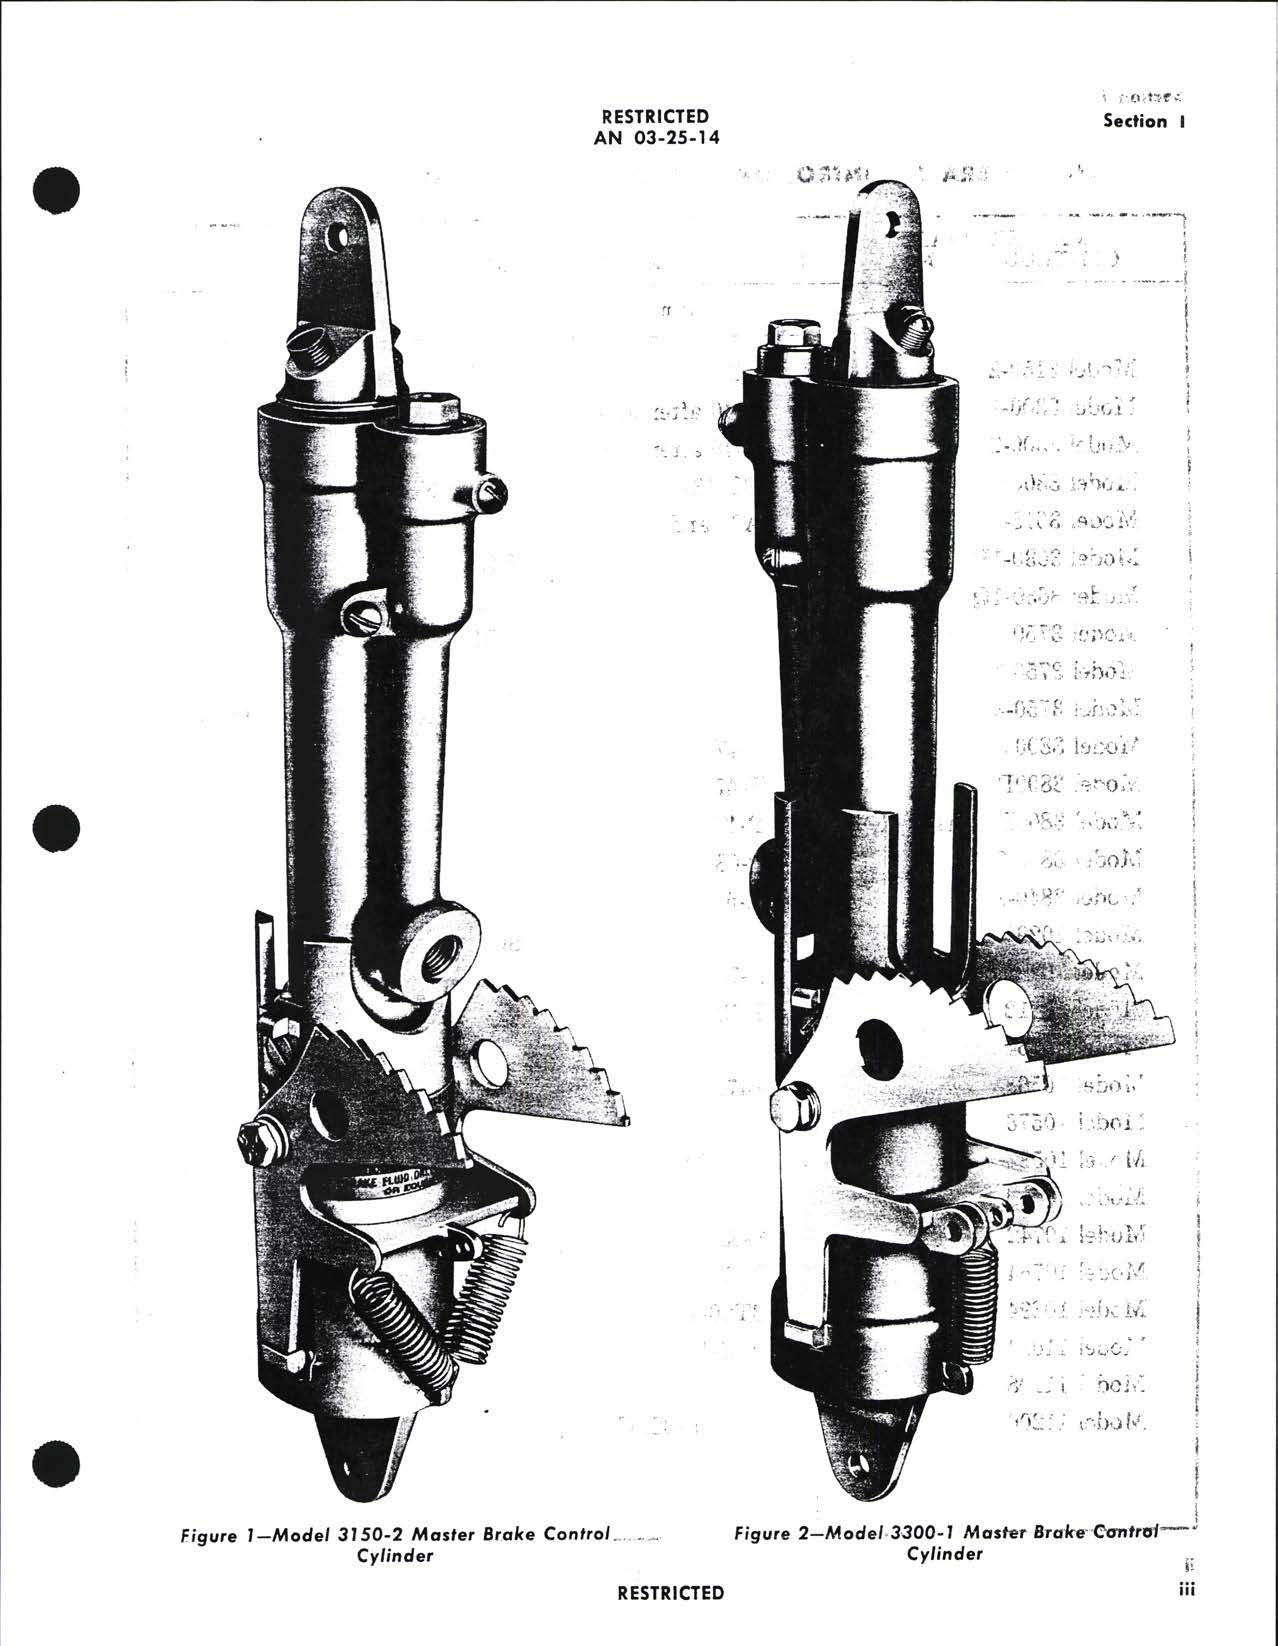 Sample page 5 from AirCorps Library document: Operation, Service, & Overhaul Instructions with Parts Catalog for Master Brake Control Cylinders